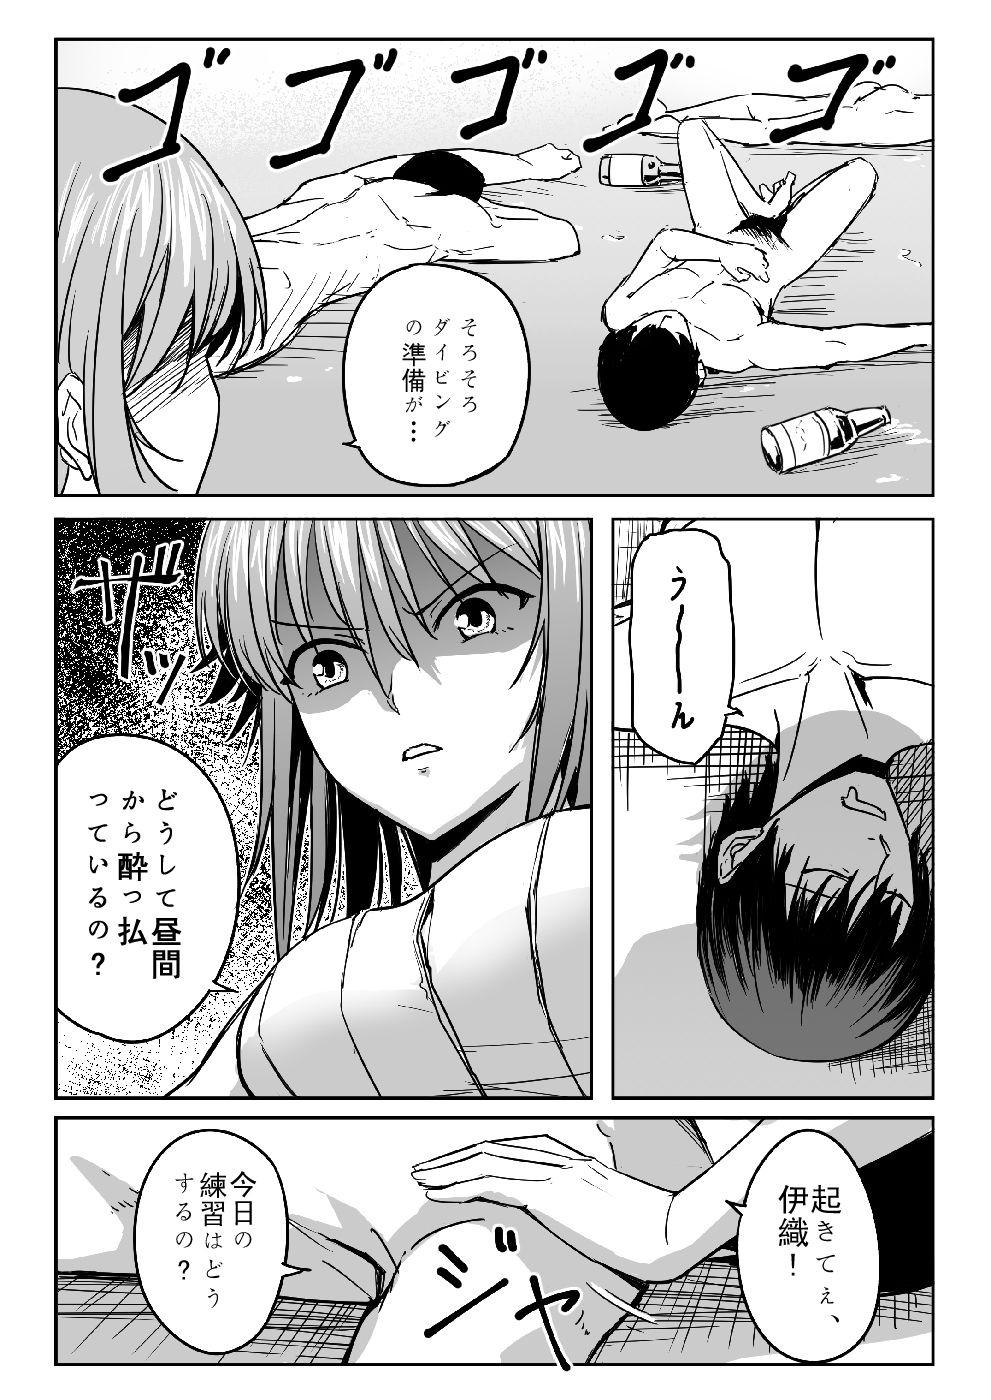 Missionary Chika-chan is a goodbye! - Grand blue Webcamshow - Page 6